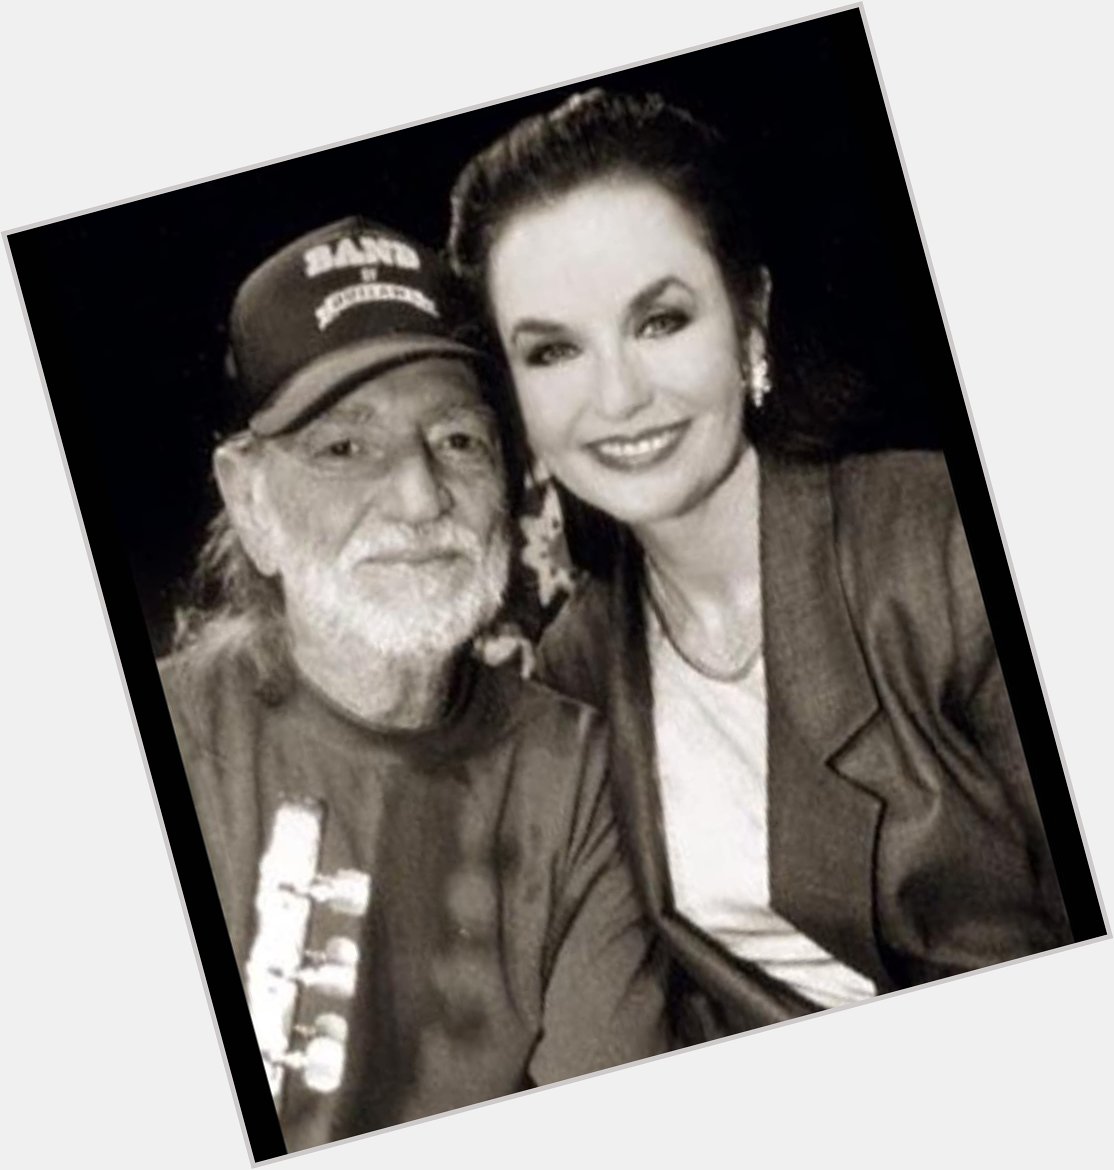 Happy Birthday to Crystal Gayle who turns 71 today!   Pictured here with Willie Nelson. 